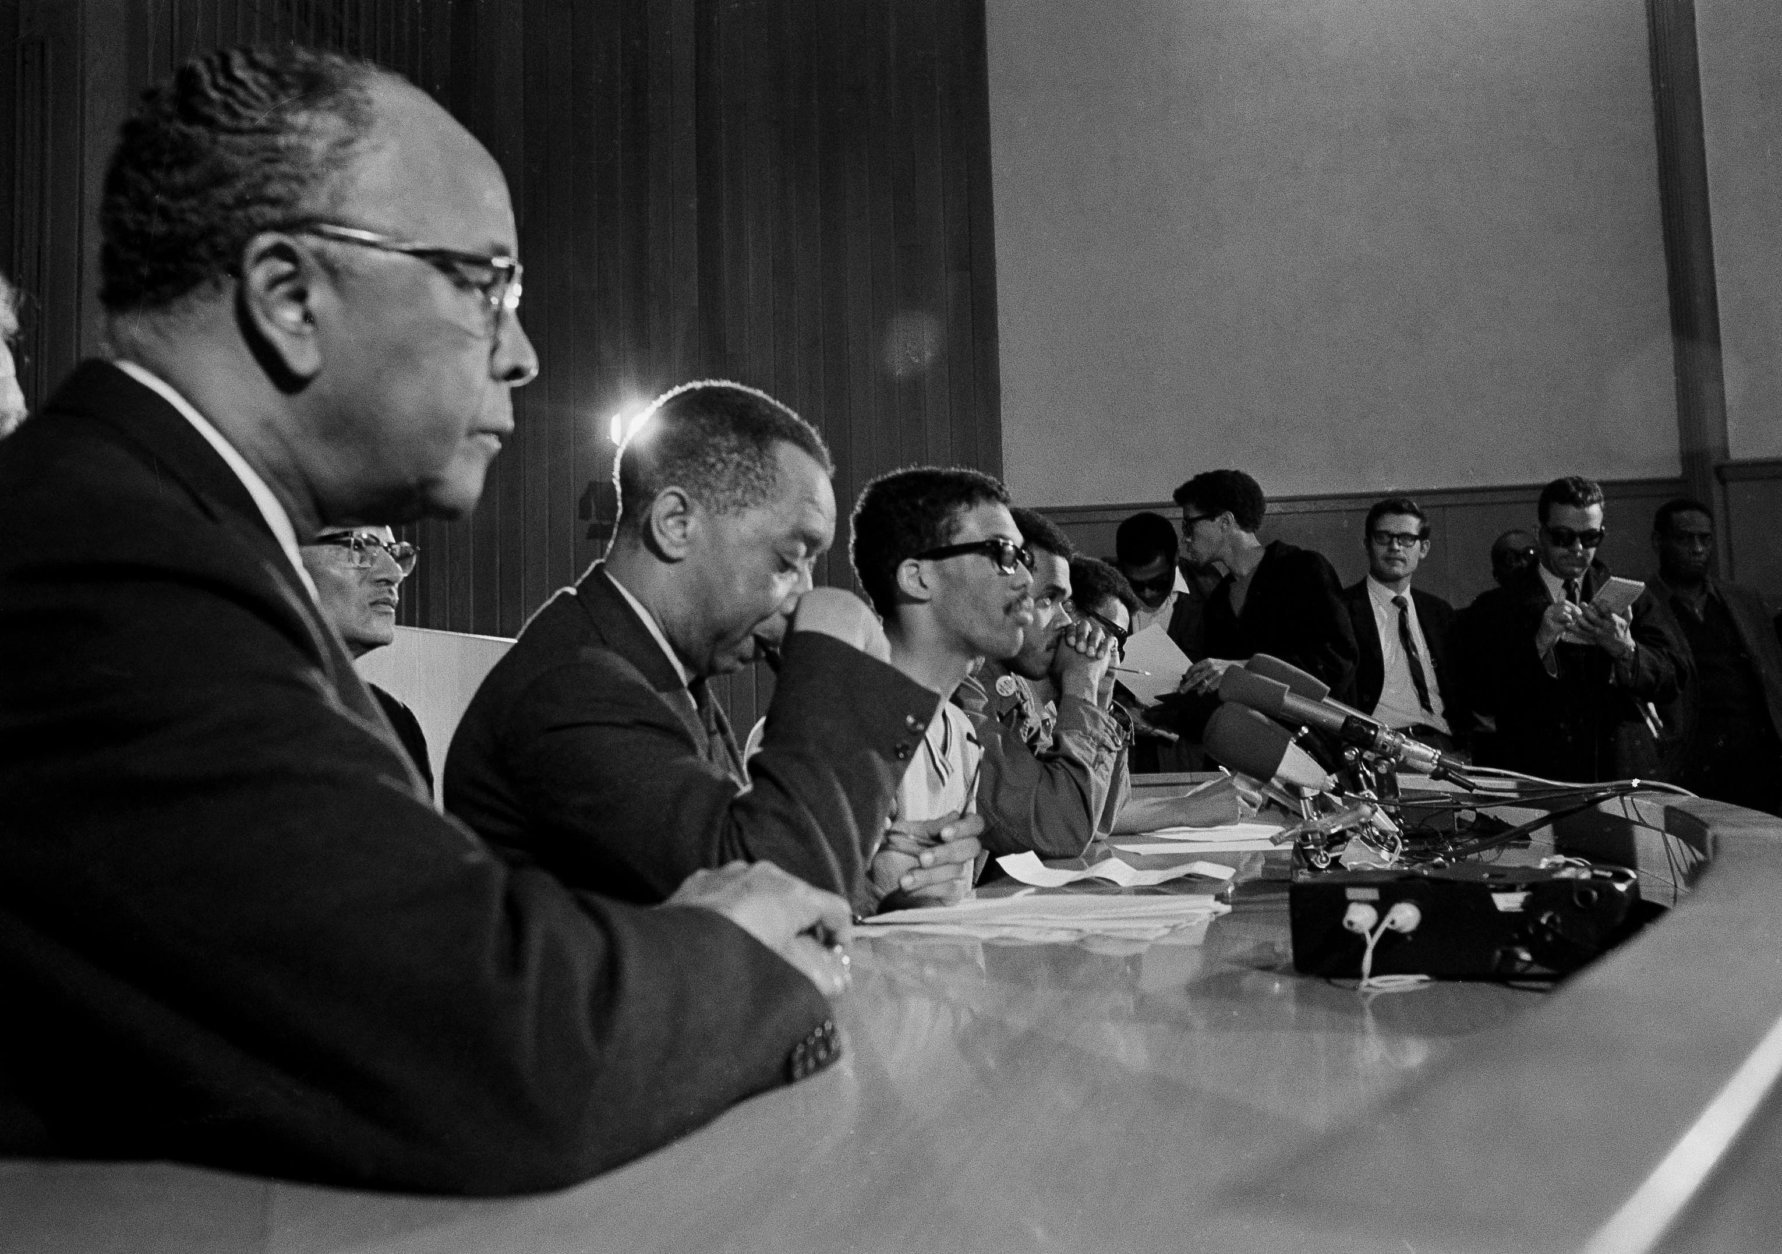 Dr. Kenneth Clark, New York psychologist and member of the board of trustees of Howard University, speaks at a news conference which student leaders in Washington, D.C., March 23, 1968. From left: Clark, Edward Brown, student council president, Tony Gittens and Q. T. Jackson. (AP Photo/Bob Schutz)